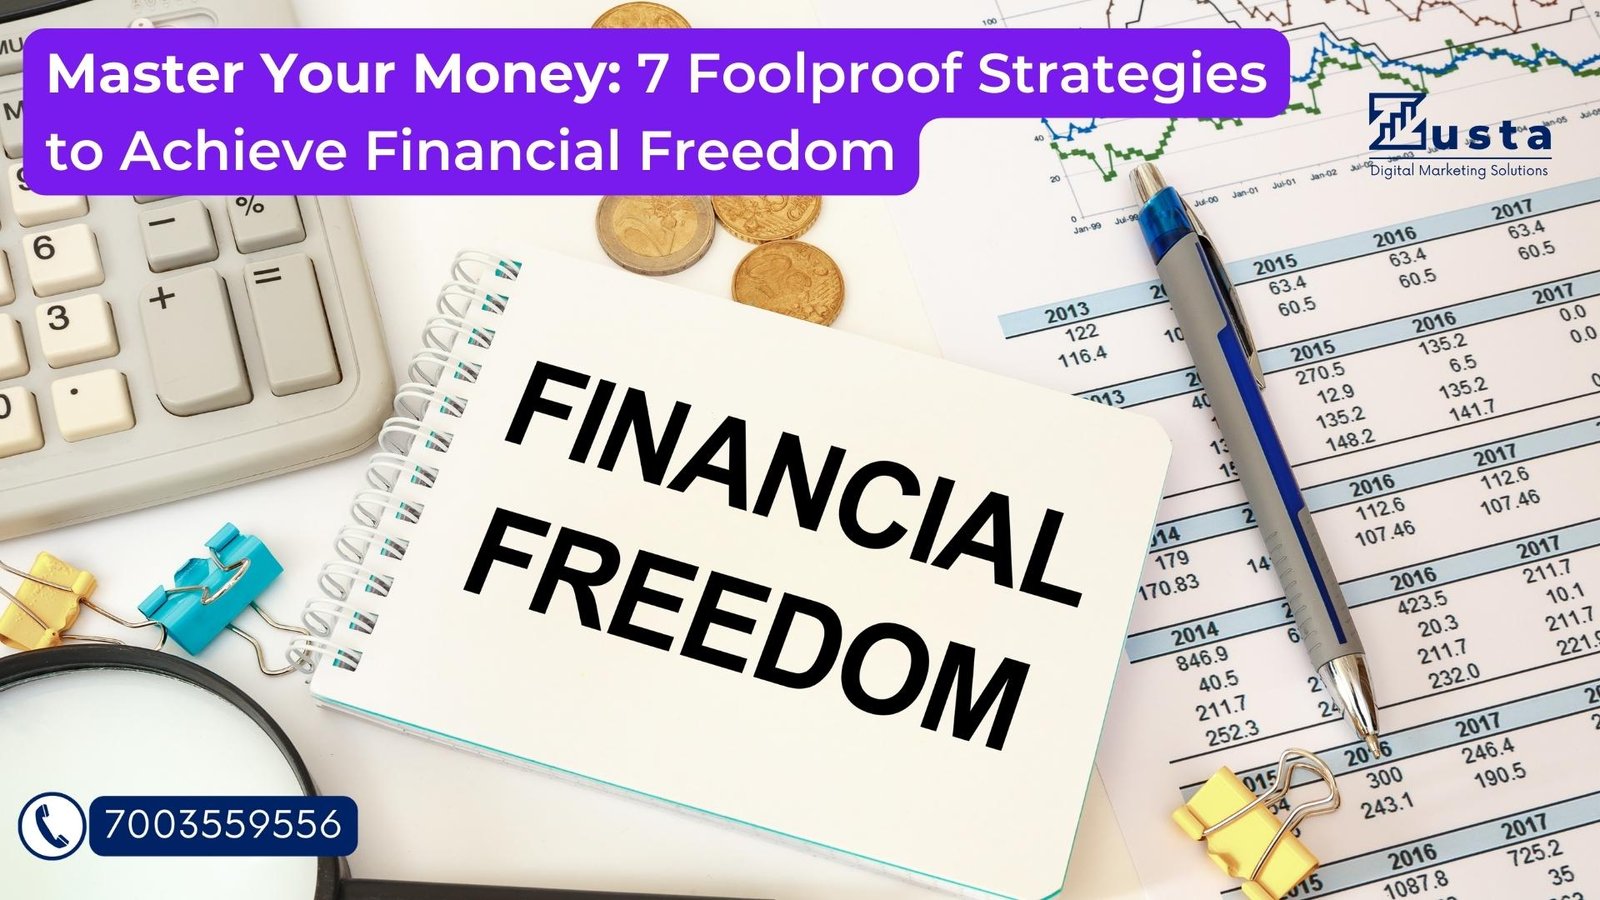 Master Your Money: 7 Foolproof Strategies to Achieve Financial Freedom